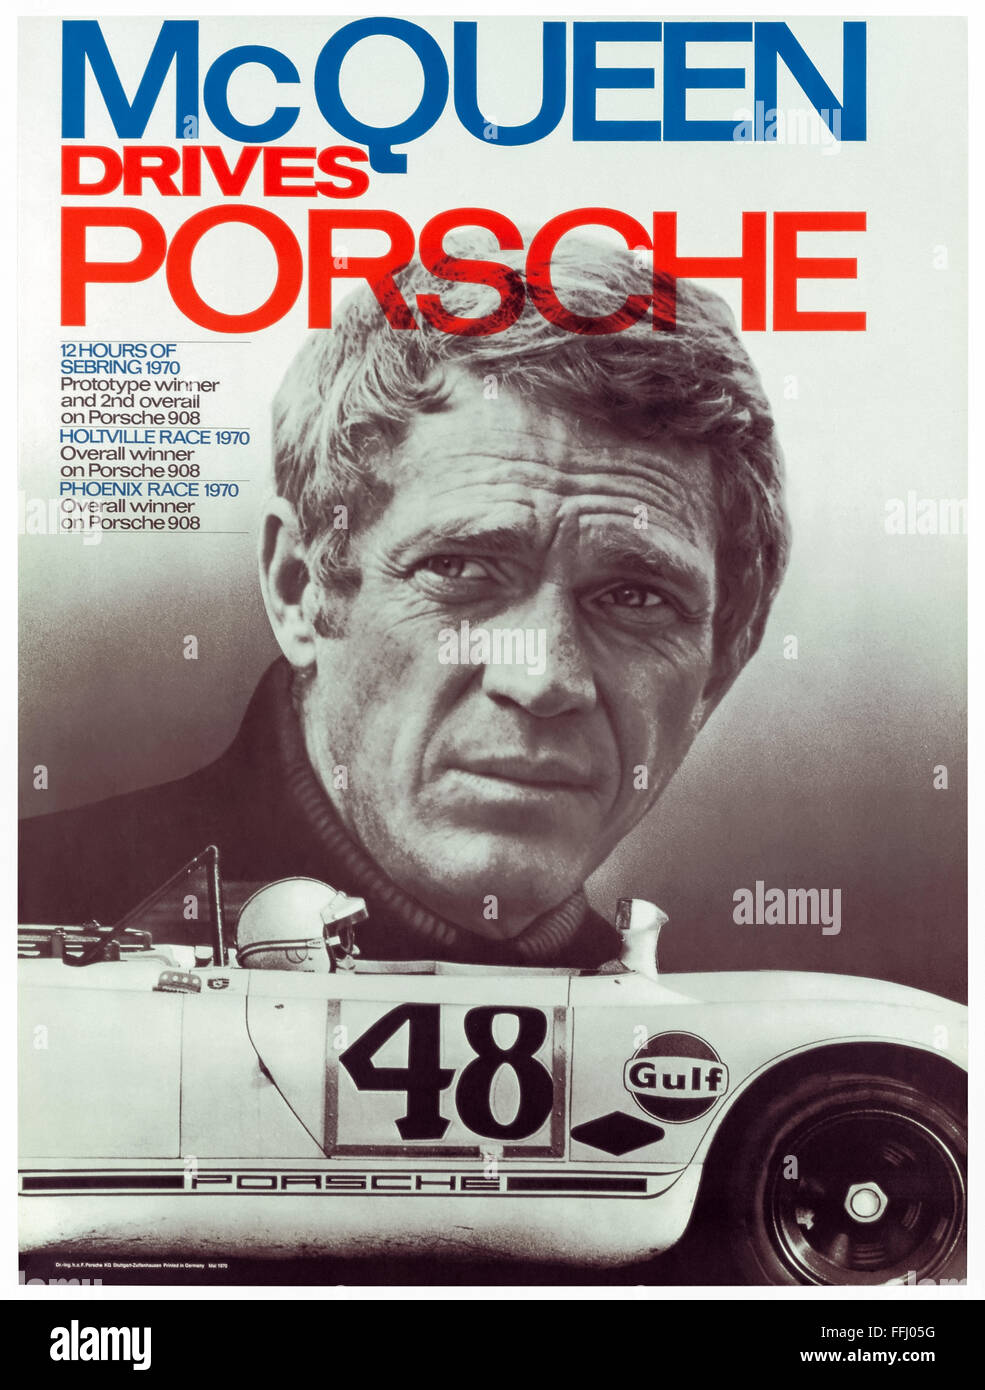 'McQueen Drives Porsche' movie poster for 'Le Mans' directed by Lee H. Katzin and released in 1971. See description for more information. Stock Photo